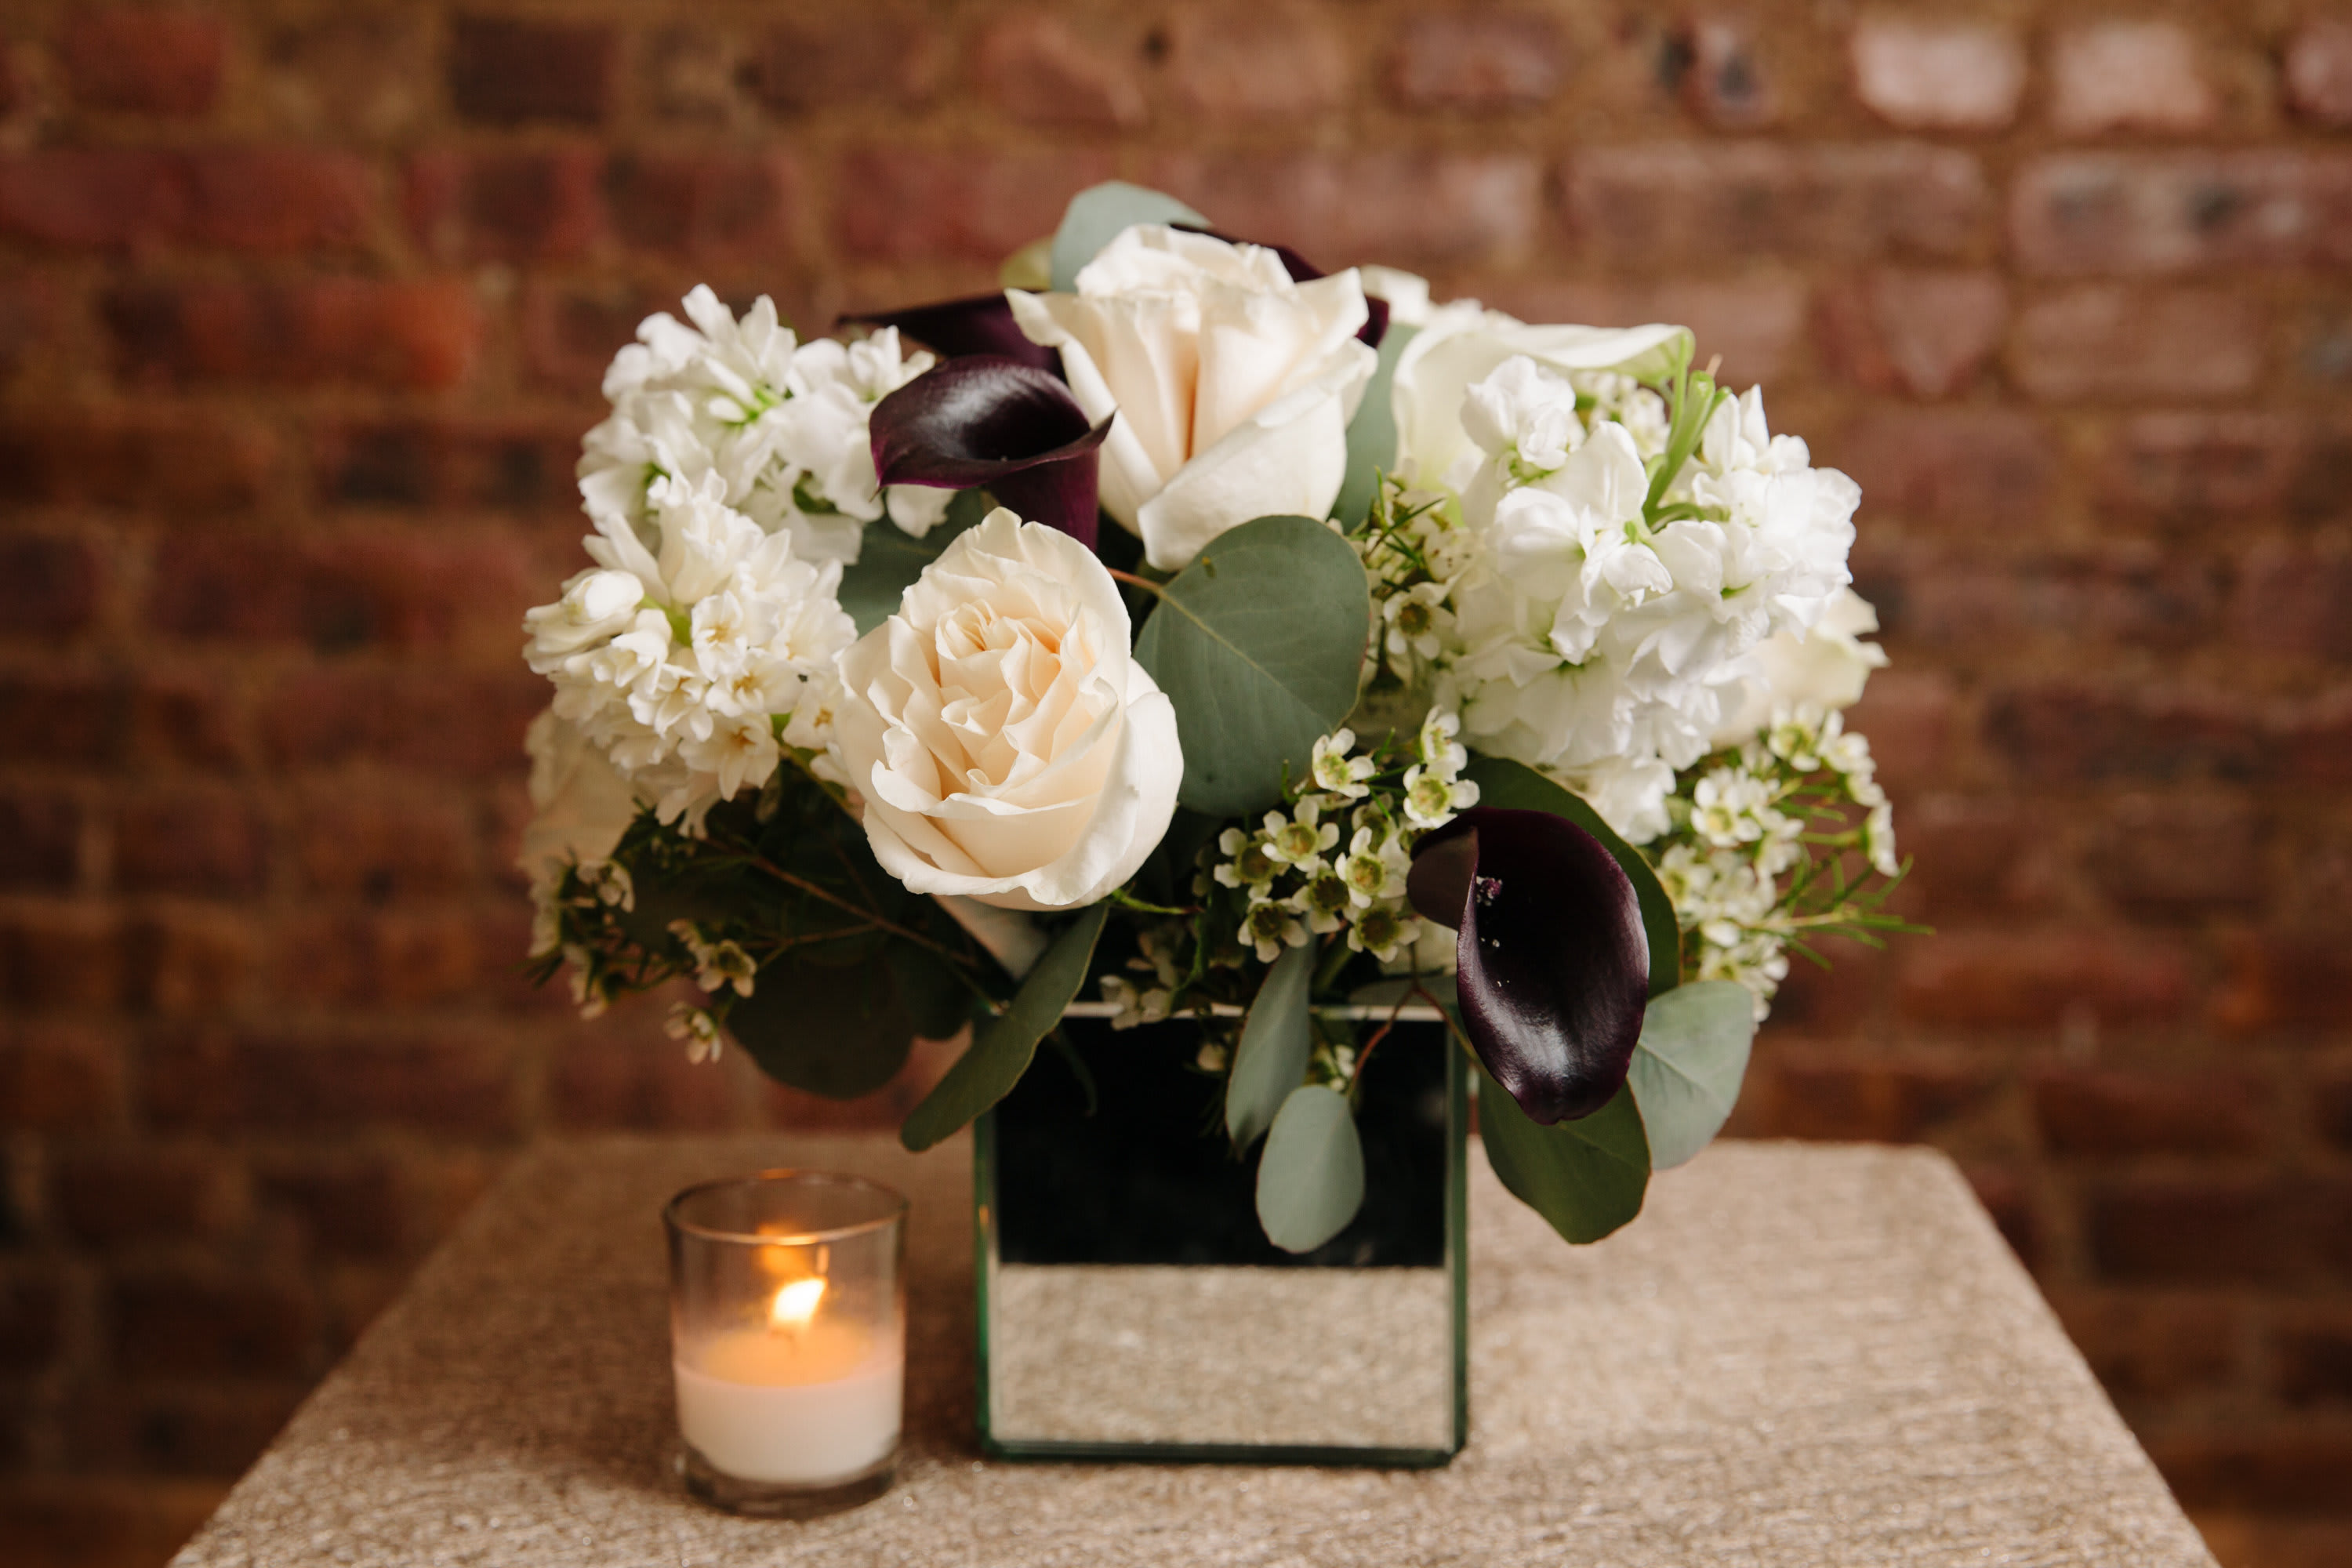 Deep Desire  - An elegant arrangement of white seasonal flowers with a deep touch displayed in a decorative mirror vase. 